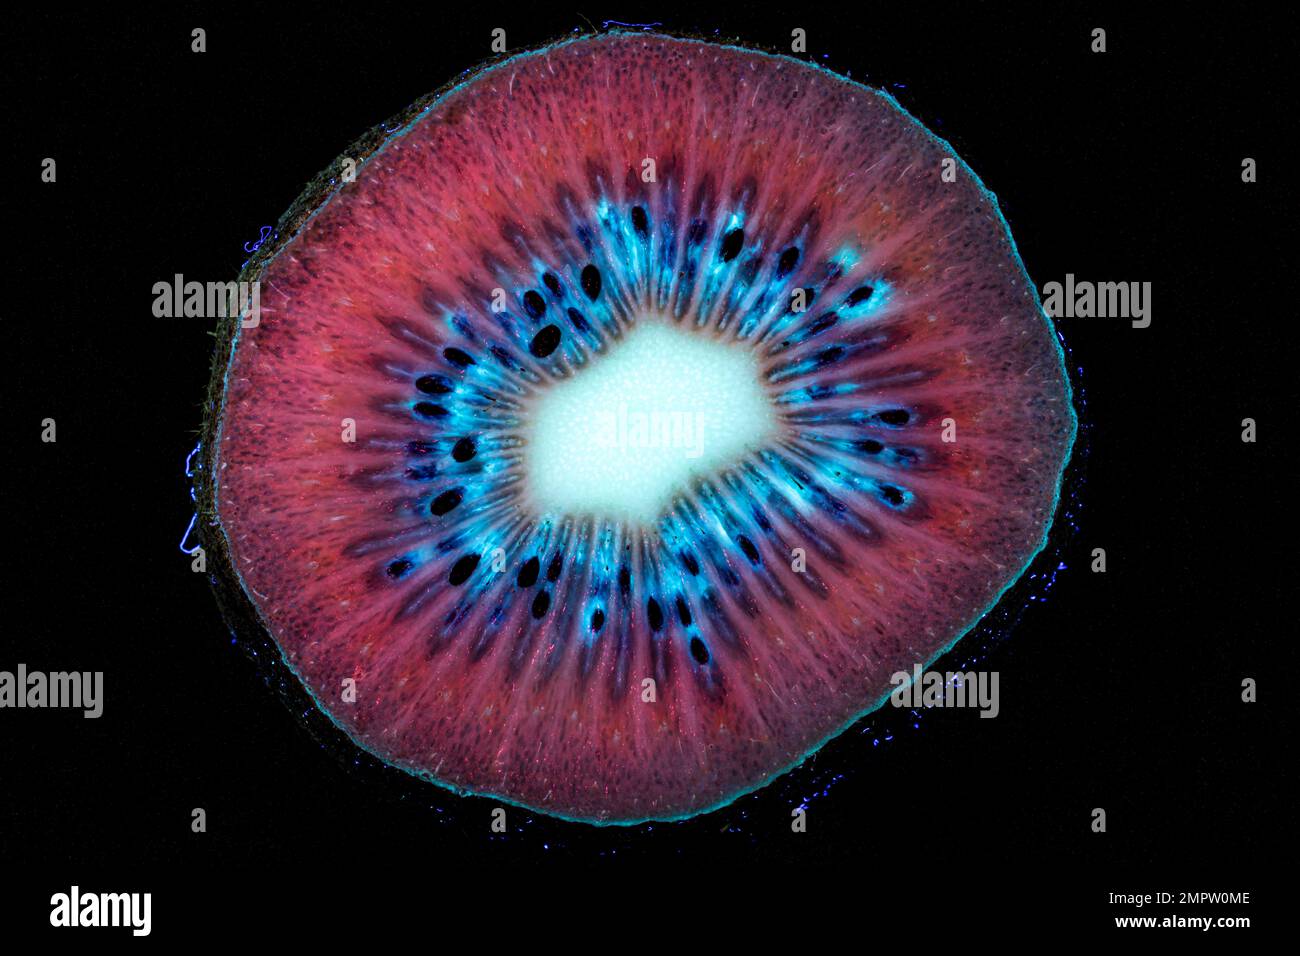 A cross section of Kiwifruit looks like something in outer space (a nebula or supernova) in this photo taken with ultraviolet light. Stock Photo